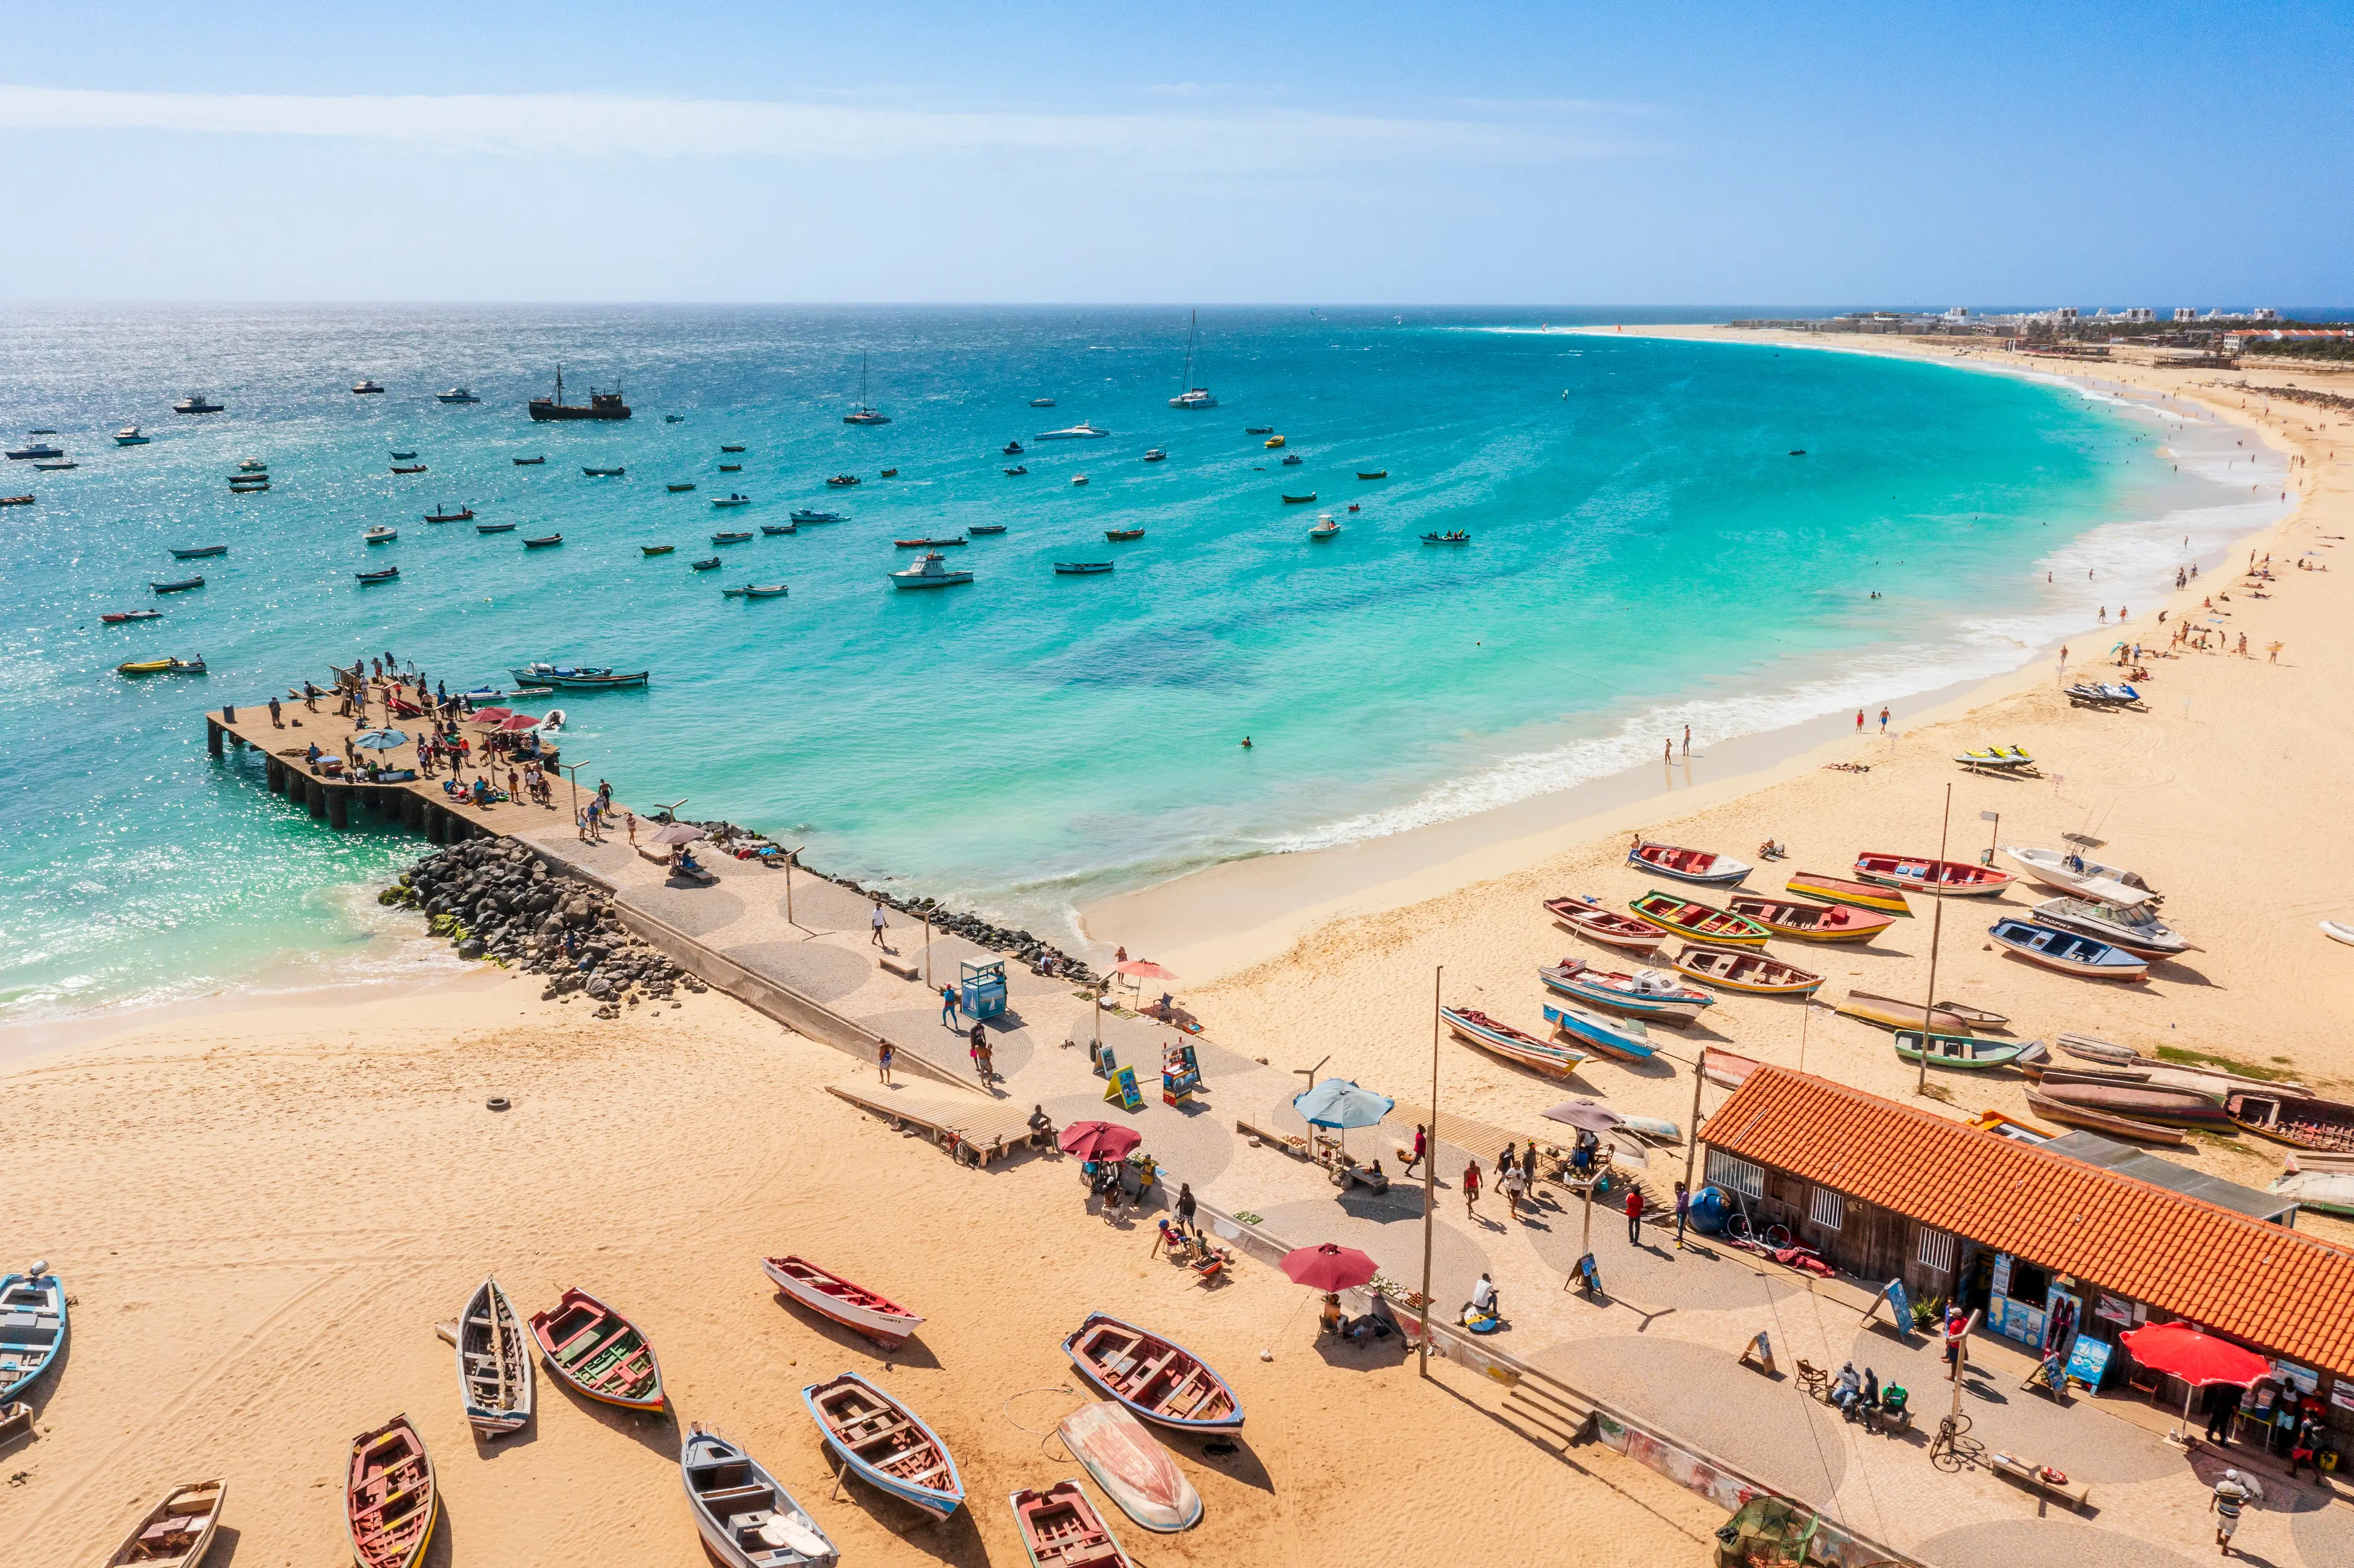 5-Day Solo Culinary and Shopping Experience in Cape Verde